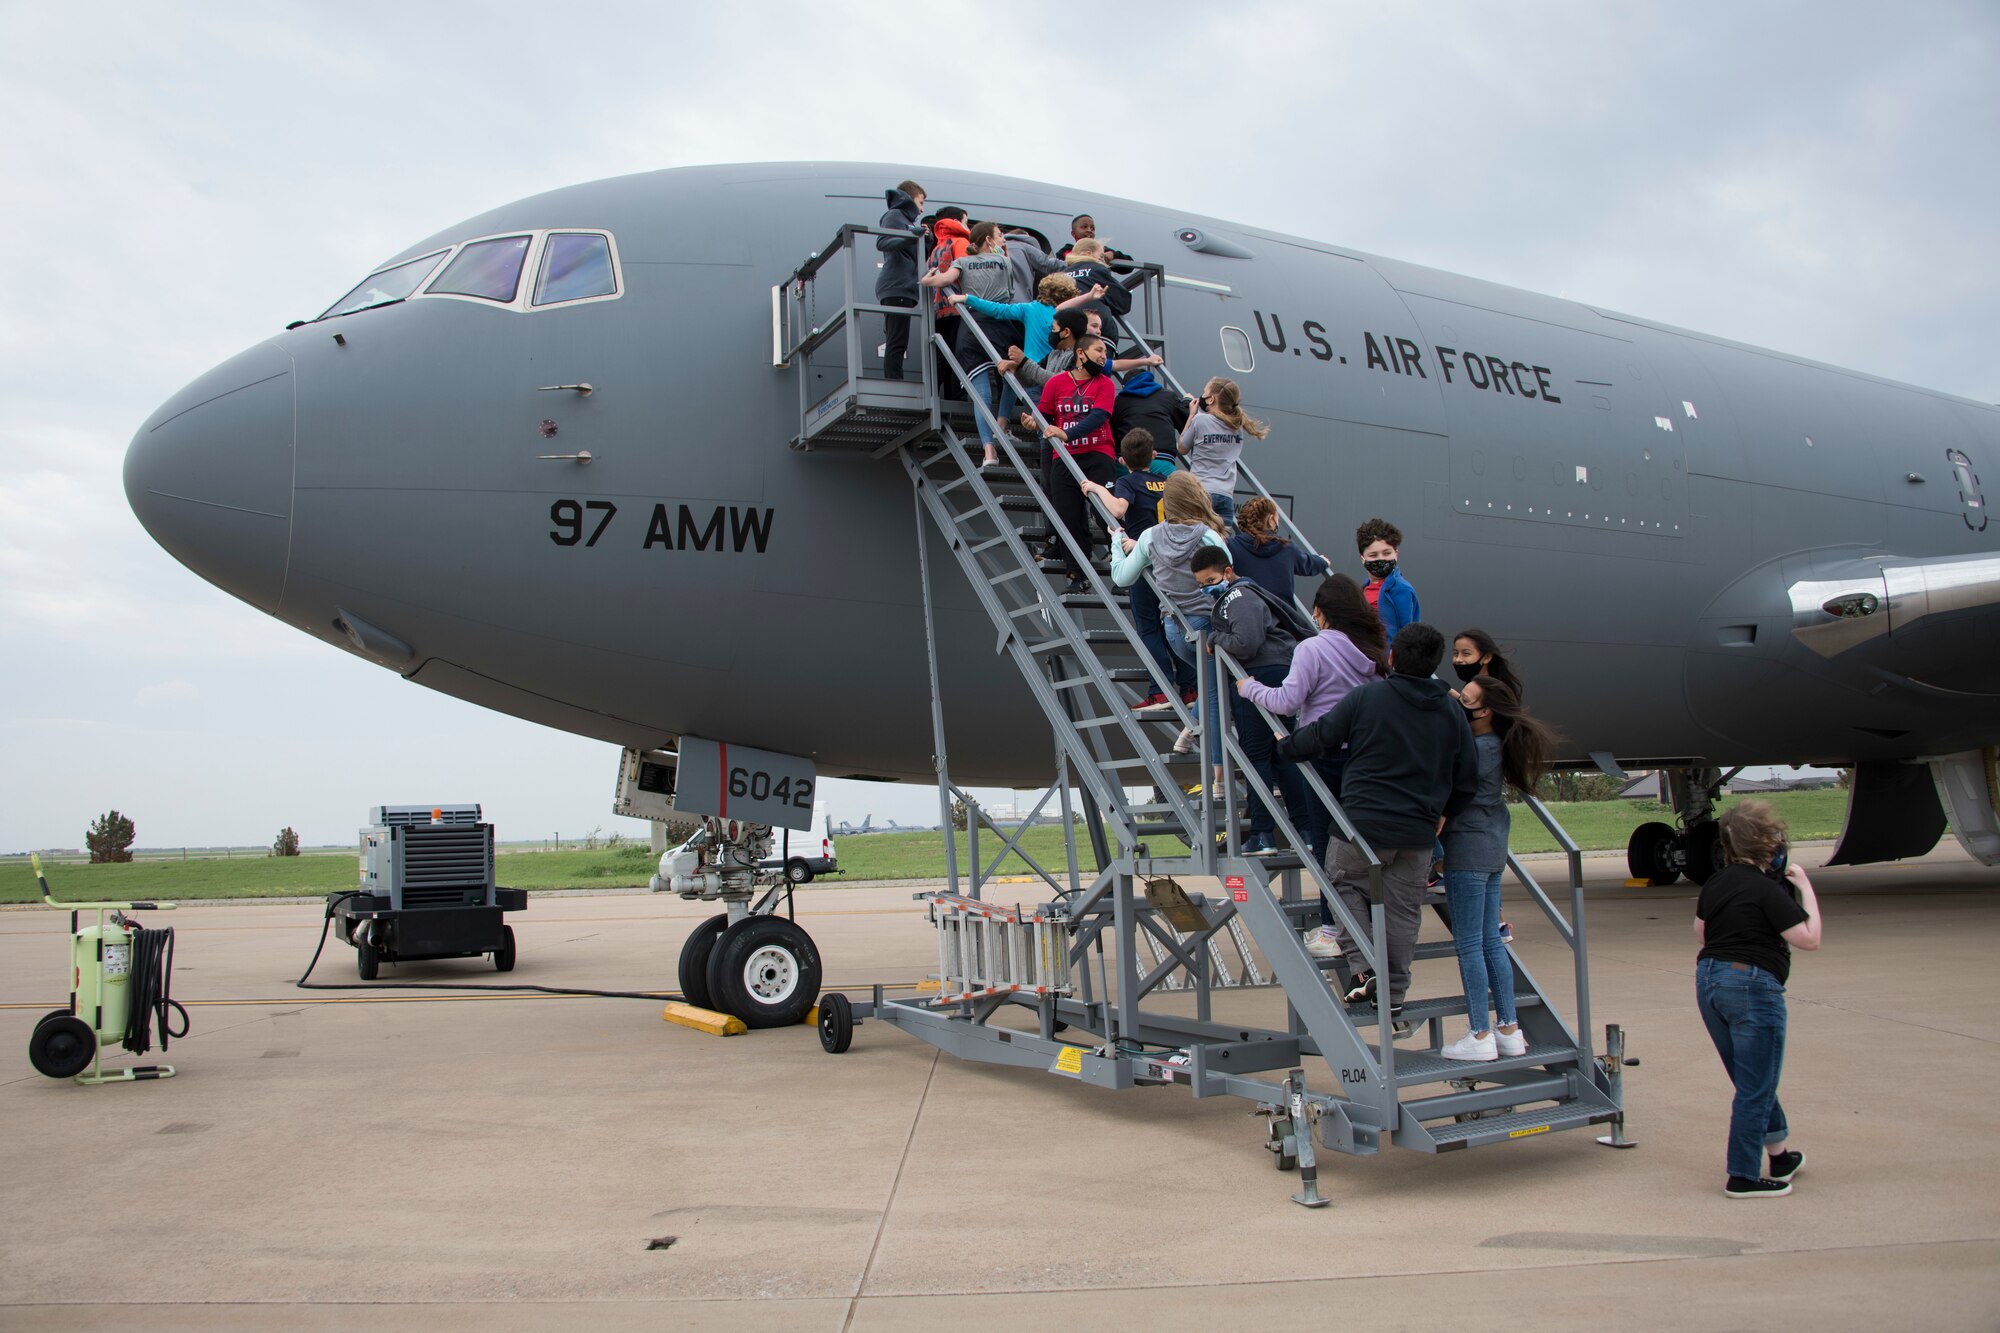 Fifth-grade students from Altus Intermediate School, Navajo Elementary School and Altus Christian Academy wait to view the inside of a KC-46 Pegasus, April 29, 2021, at Altus Air Force Base, Oklahoma. During their visit, students engaged with Airmen, asked questions about aircraft and learned facts like how much weight the planes can carry and how fast they can go. (U.S. Air Force photo by Airman 1st Class Amanda Lovelace)